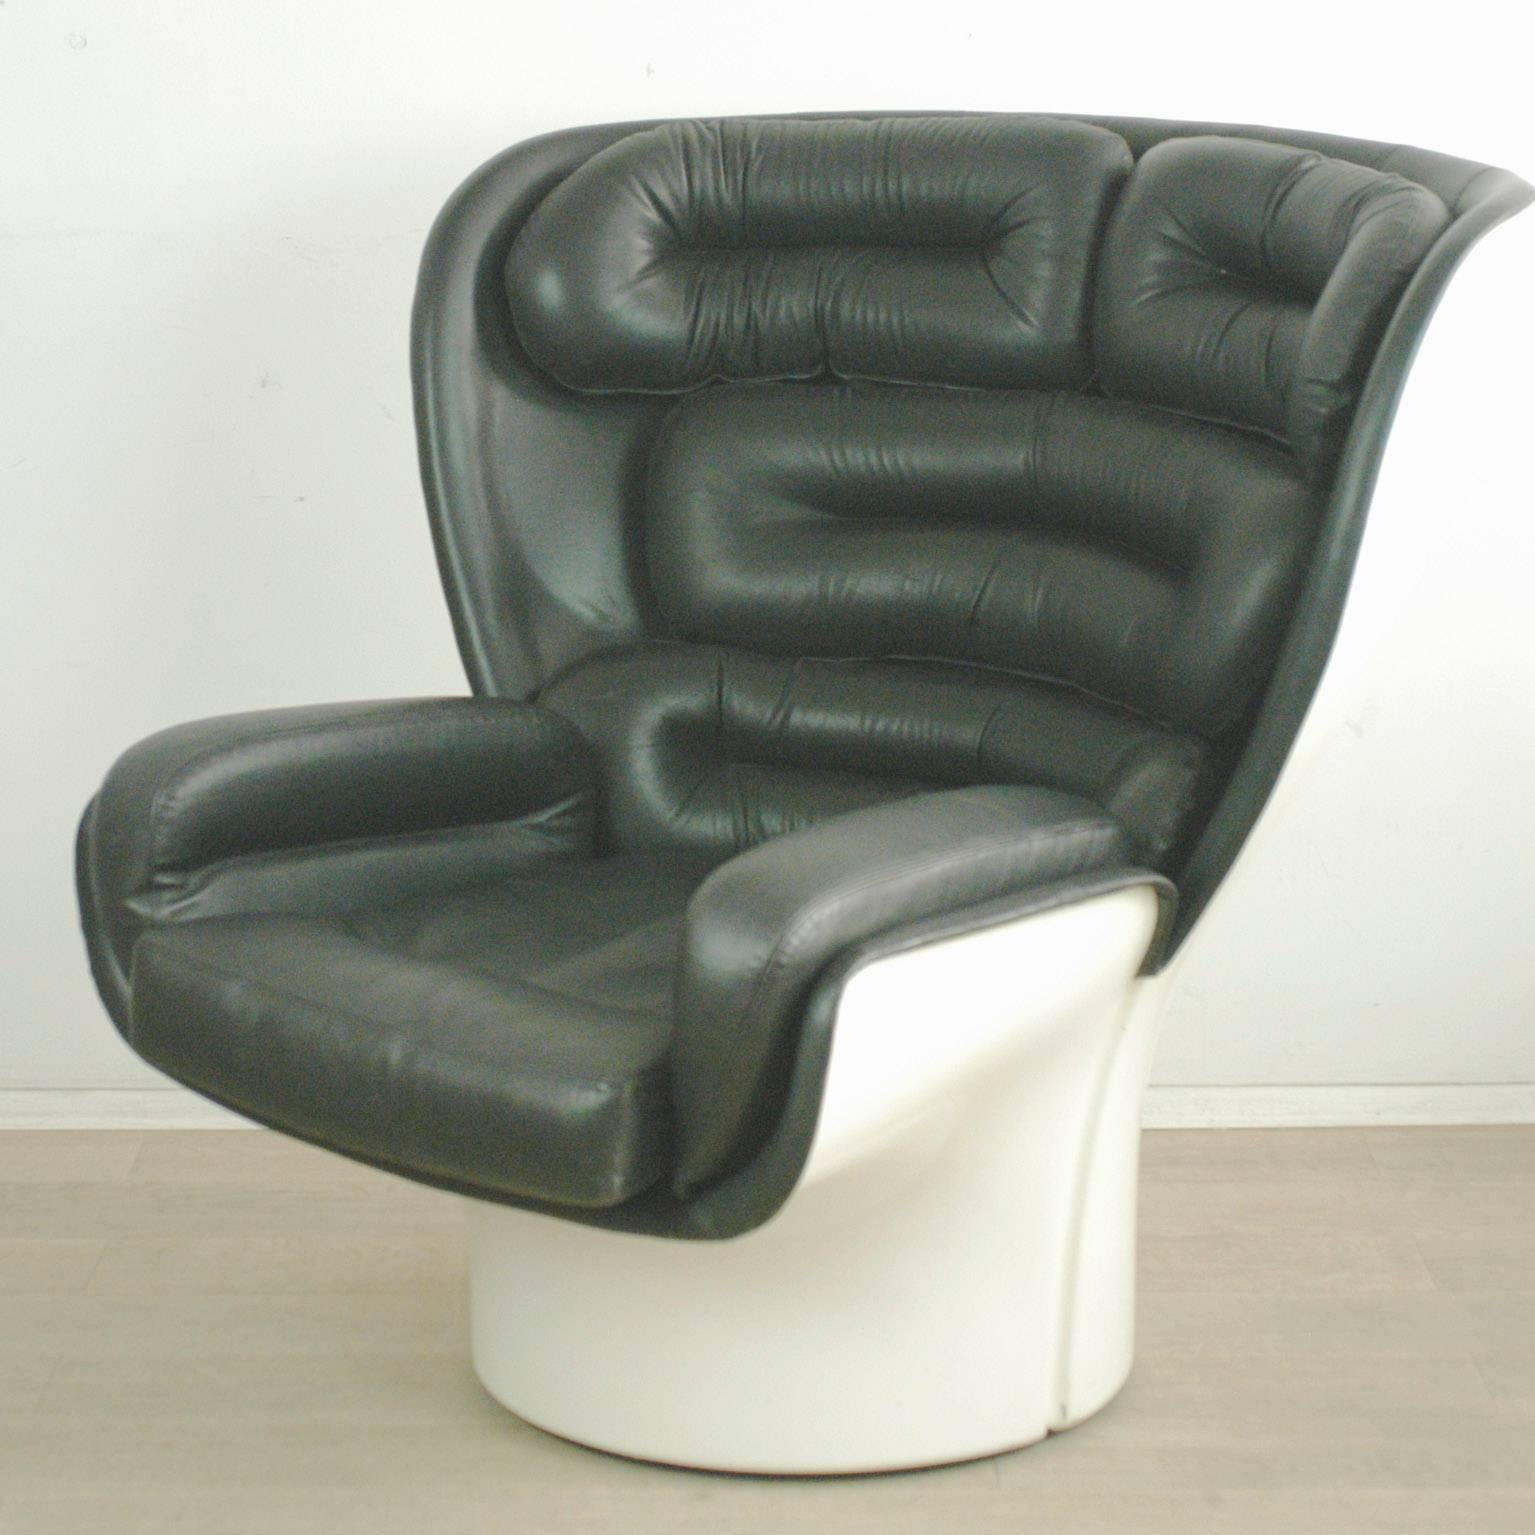 Joe Colombos iconic and comfortable Elda chair from the 1960s with white fiberglass shell and black leather, rotating base. Great Highlight for any Modernist Interior!